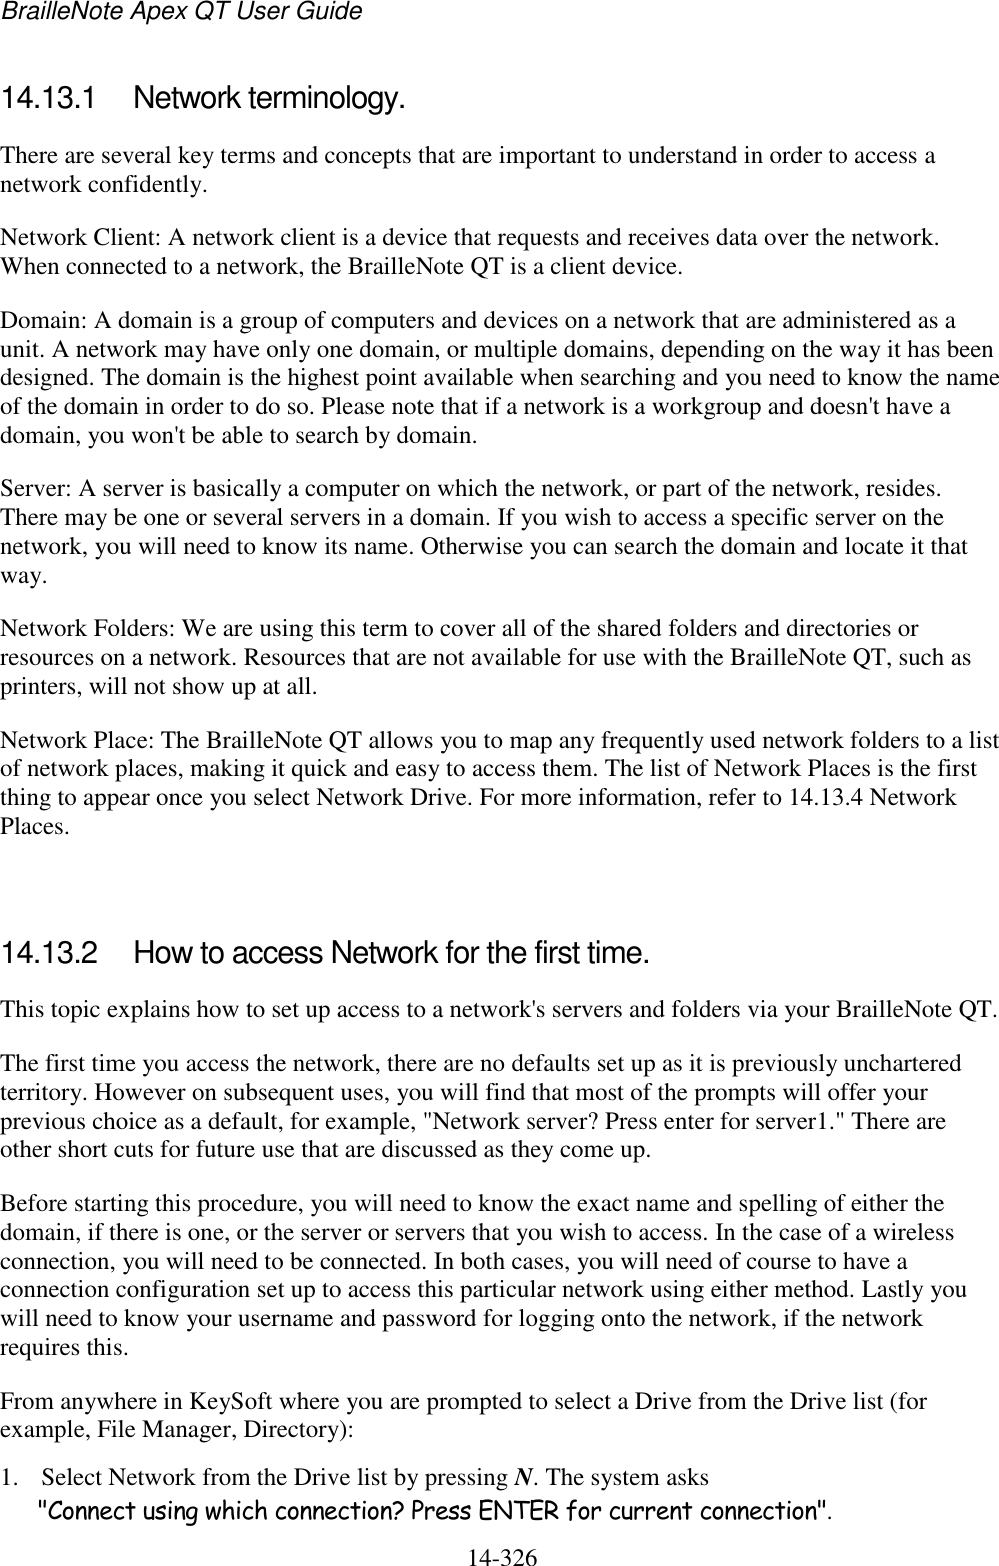 BrailleNote Apex QT User Guide  14-326   14.13.1  Network terminology. There are several key terms and concepts that are important to understand in order to access a network confidently. Network Client: A network client is a device that requests and receives data over the network. When connected to a network, the BrailleNote QT is a client device. Domain: A domain is a group of computers and devices on a network that are administered as a unit. A network may have only one domain, or multiple domains, depending on the way it has been designed. The domain is the highest point available when searching and you need to know the name of the domain in order to do so. Please note that if a network is a workgroup and doesn&apos;t have a domain, you won&apos;t be able to search by domain. Server: A server is basically a computer on which the network, or part of the network, resides. There may be one or several servers in a domain. If you wish to access a specific server on the network, you will need to know its name. Otherwise you can search the domain and locate it that way. Network Folders: We are using this term to cover all of the shared folders and directories or resources on a network. Resources that are not available for use with the BrailleNote QT, such as printers, will not show up at all. Network Place: The BrailleNote QT allows you to map any frequently used network folders to a list of network places, making it quick and easy to access them. The list of Network Places is the first thing to appear once you select Network Drive. For more information, refer to 14.13.4 Network Places.   14.13.2  How to access Network for the first time. This topic explains how to set up access to a network&apos;s servers and folders via your BrailleNote QT.  The first time you access the network, there are no defaults set up as it is previously unchartered territory. However on subsequent uses, you will find that most of the prompts will offer your previous choice as a default, for example, &quot;Network server? Press enter for server1.&quot; There are other short cuts for future use that are discussed as they come up. Before starting this procedure, you will need to know the exact name and spelling of either the domain, if there is one, or the server or servers that you wish to access. In the case of a wireless connection, you will need to be connected. In both cases, you will need of course to have a connection configuration set up to access this particular network using either method. Lastly you will need to know your username and password for logging onto the network, if the network requires this. From anywhere in KeySoft where you are prompted to select a Drive from the Drive list (for example, File Manager, Directory): 1. Select Network from the Drive list by pressing N. The system asks &quot;Connect using which connection? Press ENTER for current connection&quot;.  